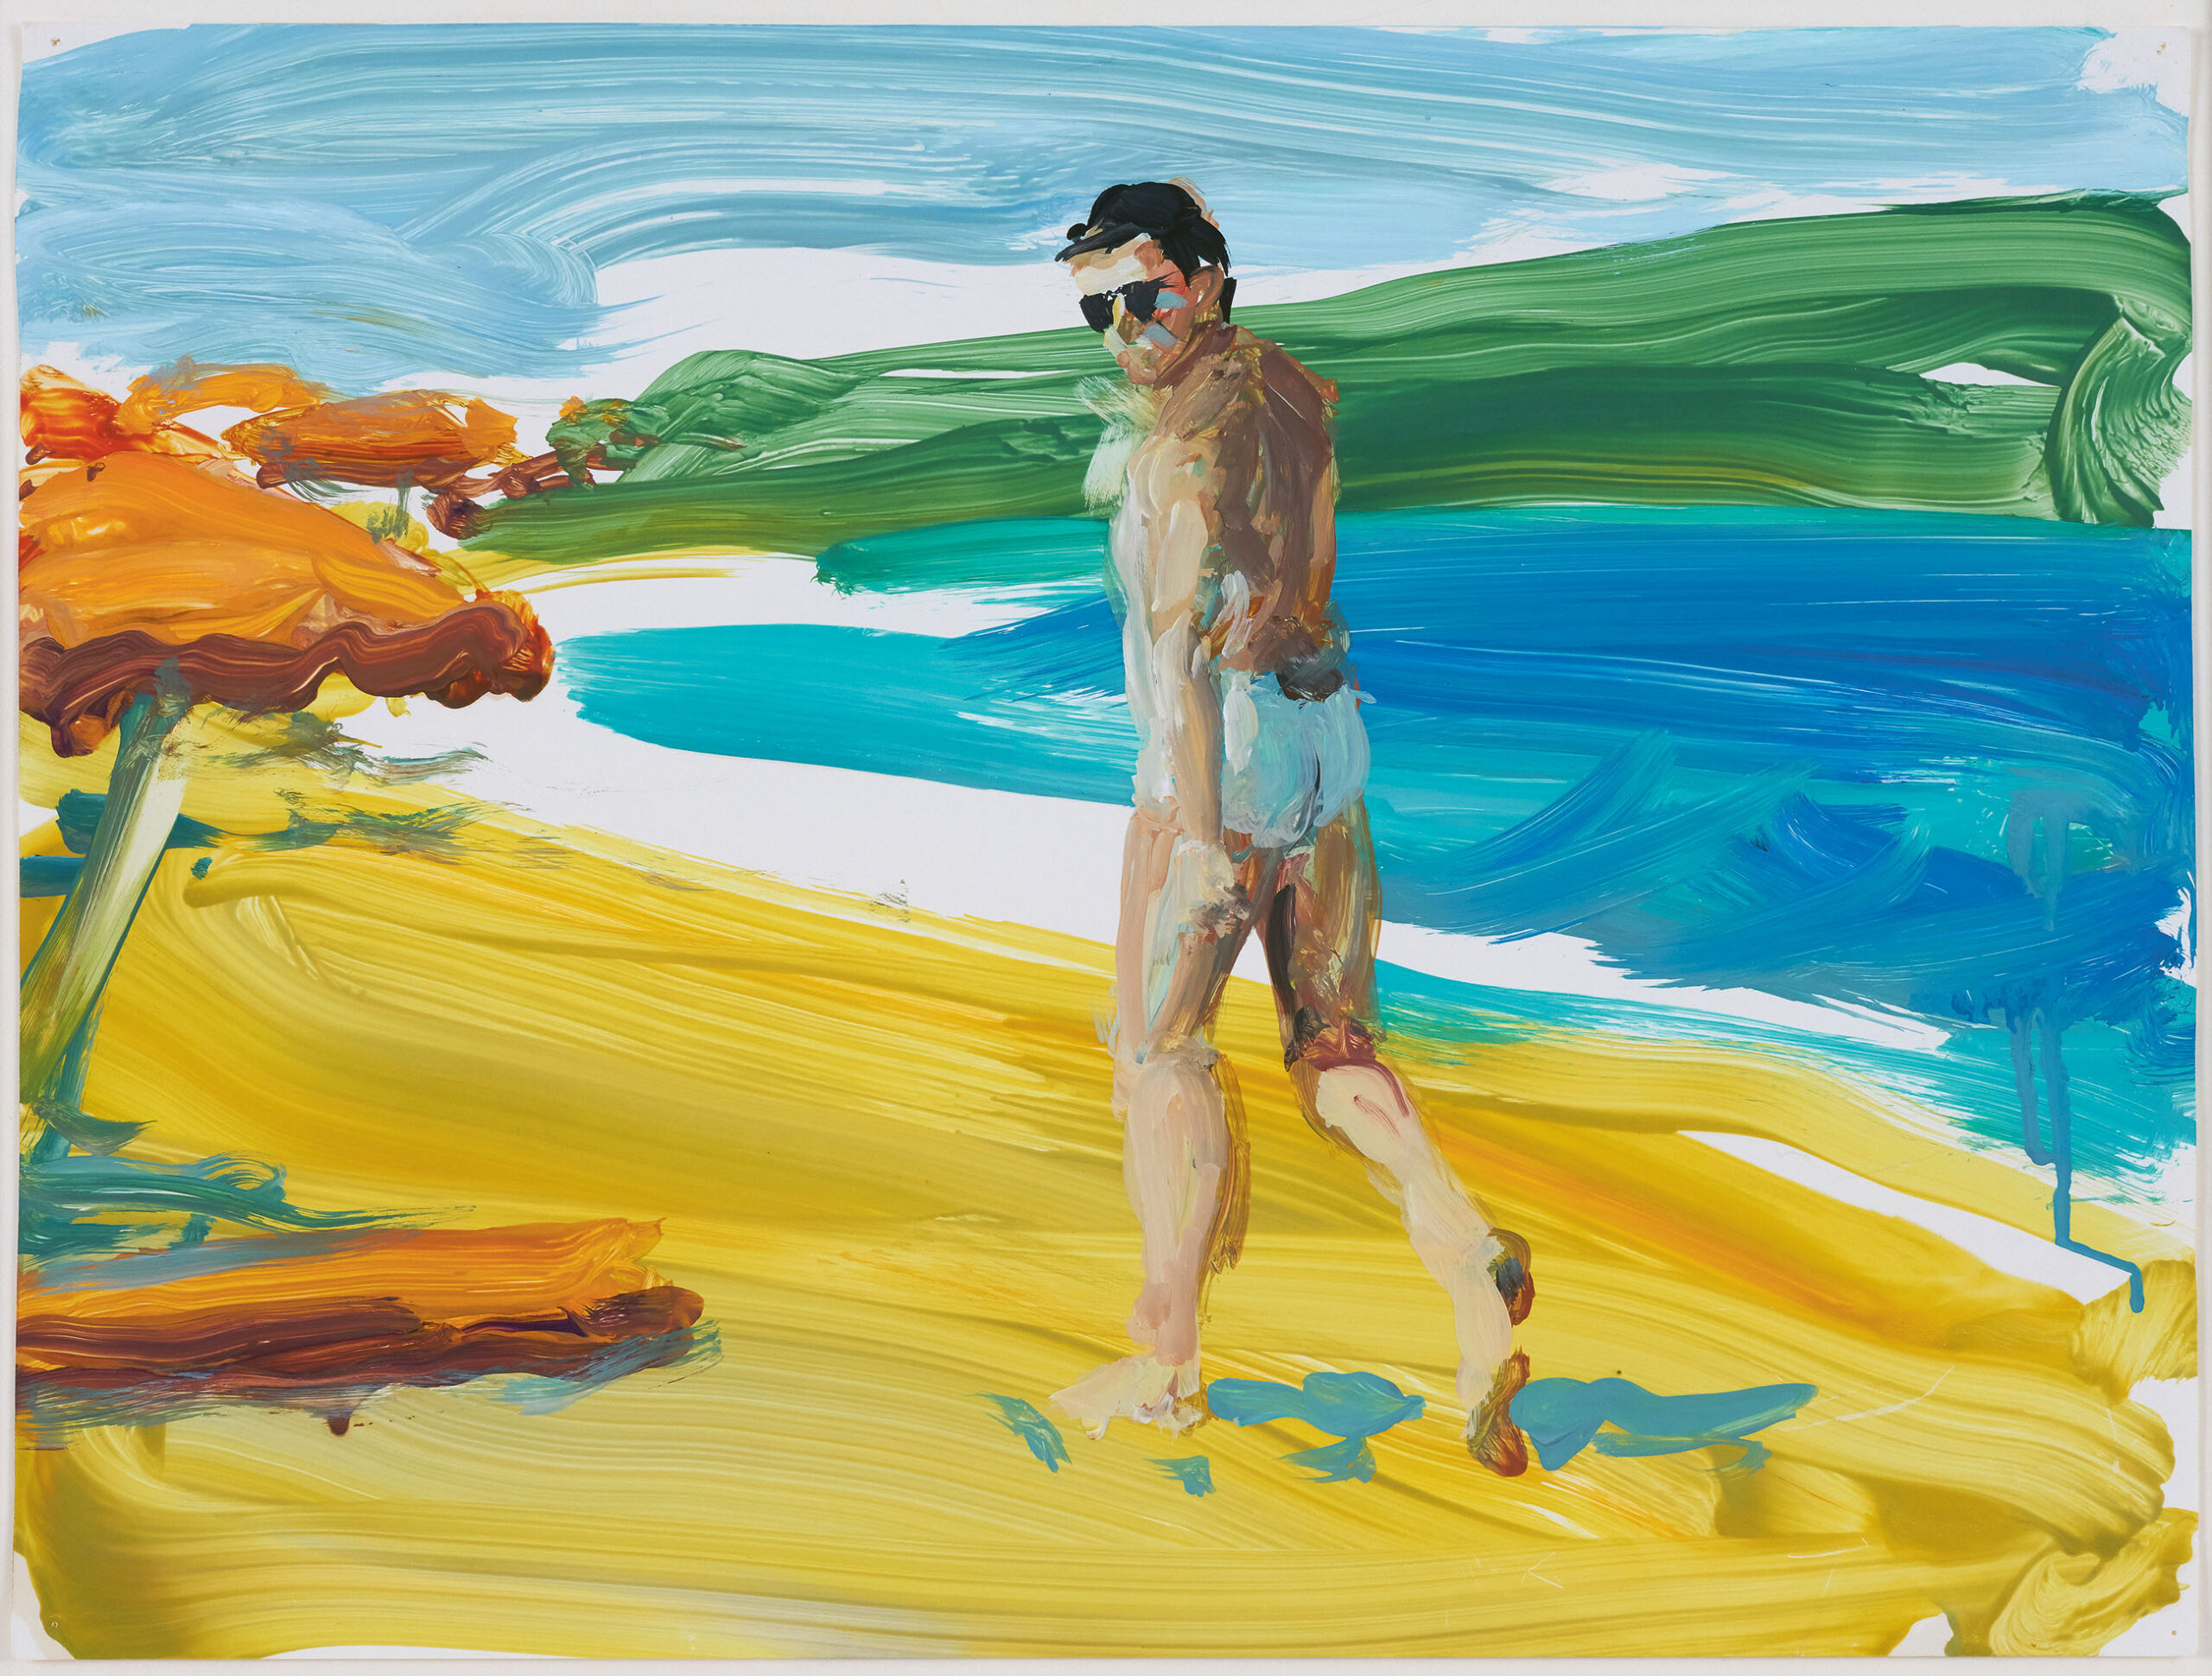 Eric Fischl, Untitled (Bather with Sunglasses), 1984